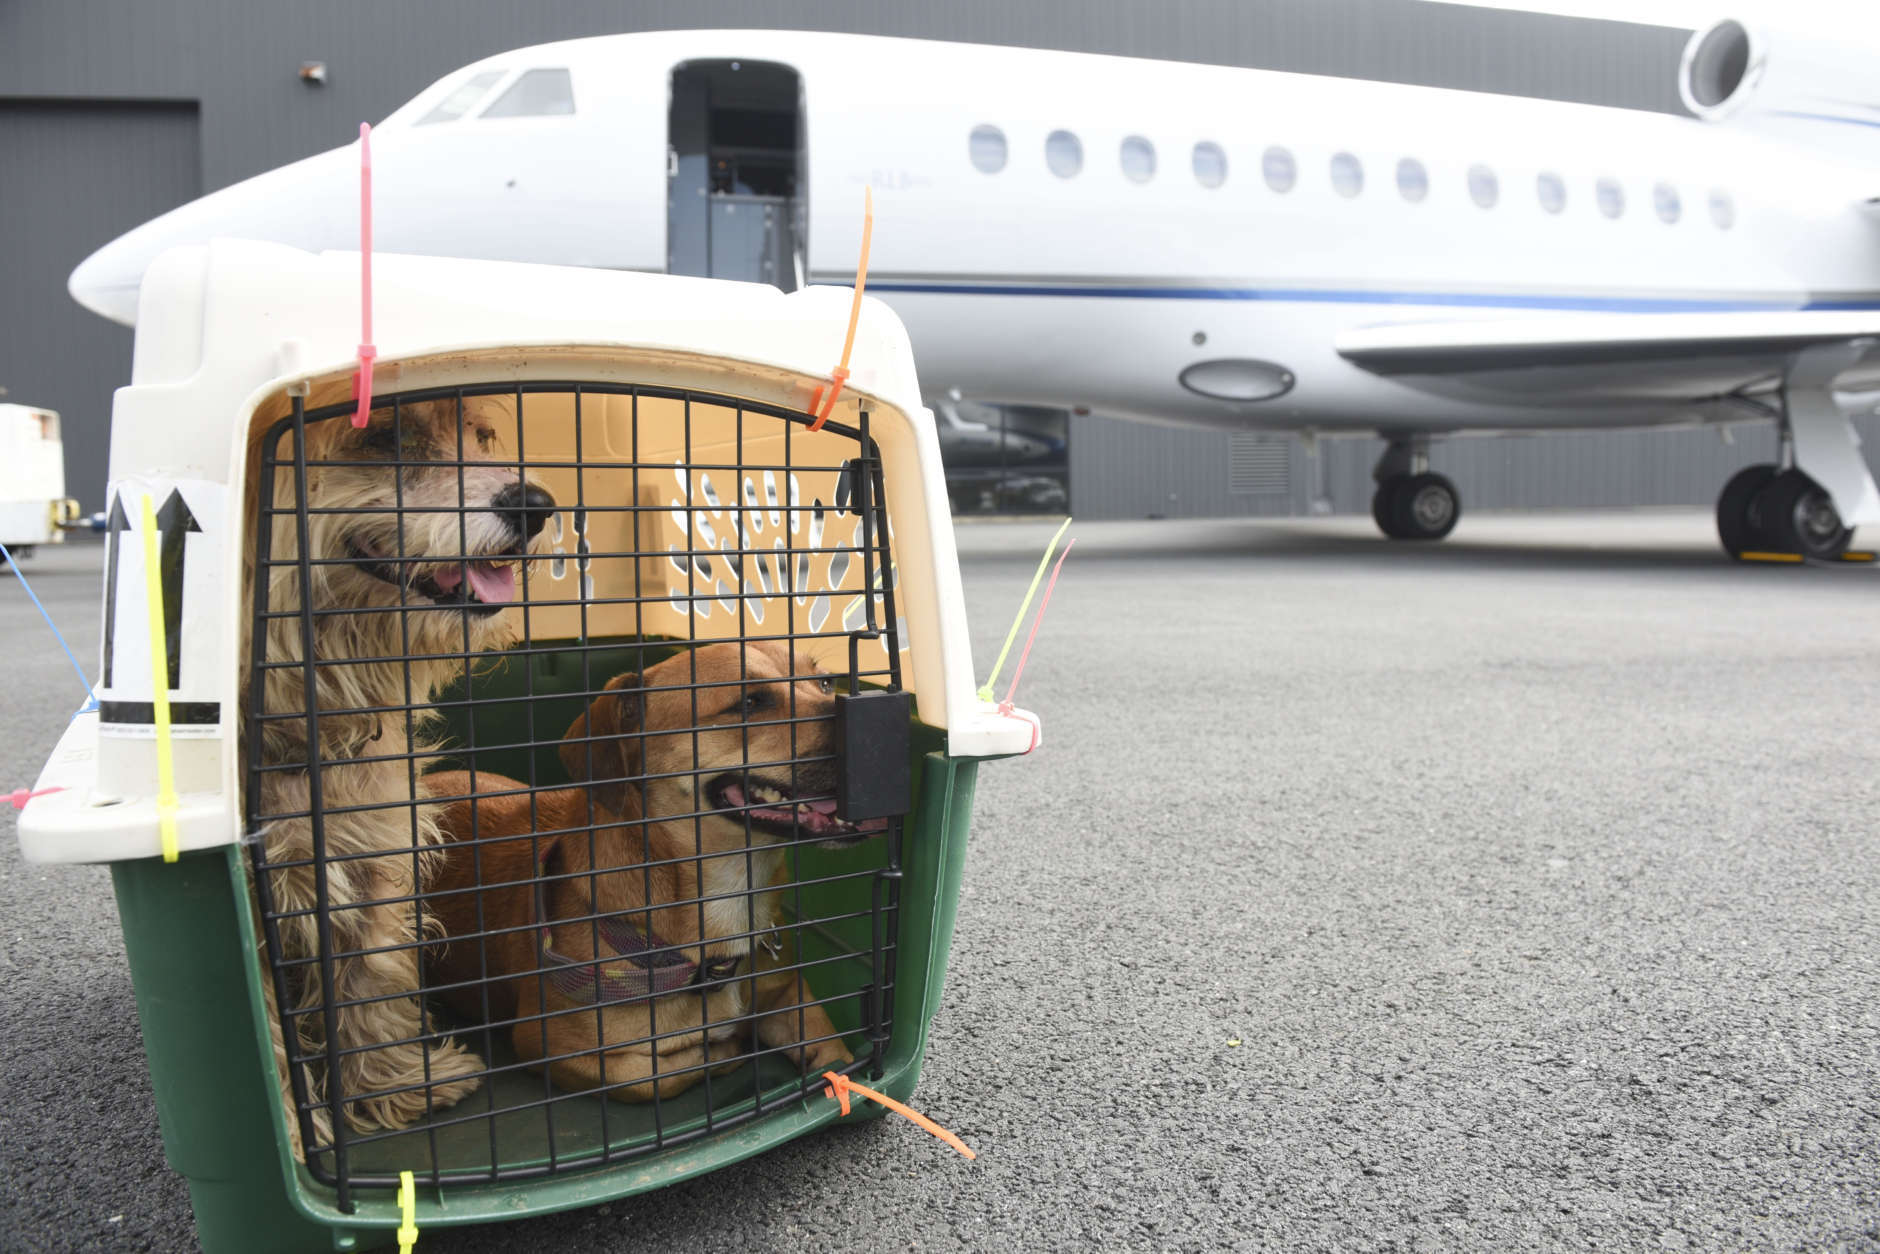 Animals evacuated from the British Virgin Islands to the U.S. due to hurricane Irma are carried off an airplane after it arrived at Dulles International Airport on Monday, Sept. 18, 2017, in Dulles, Va. (Kevin Wolf/AP Images for the Humane Society of the United States)